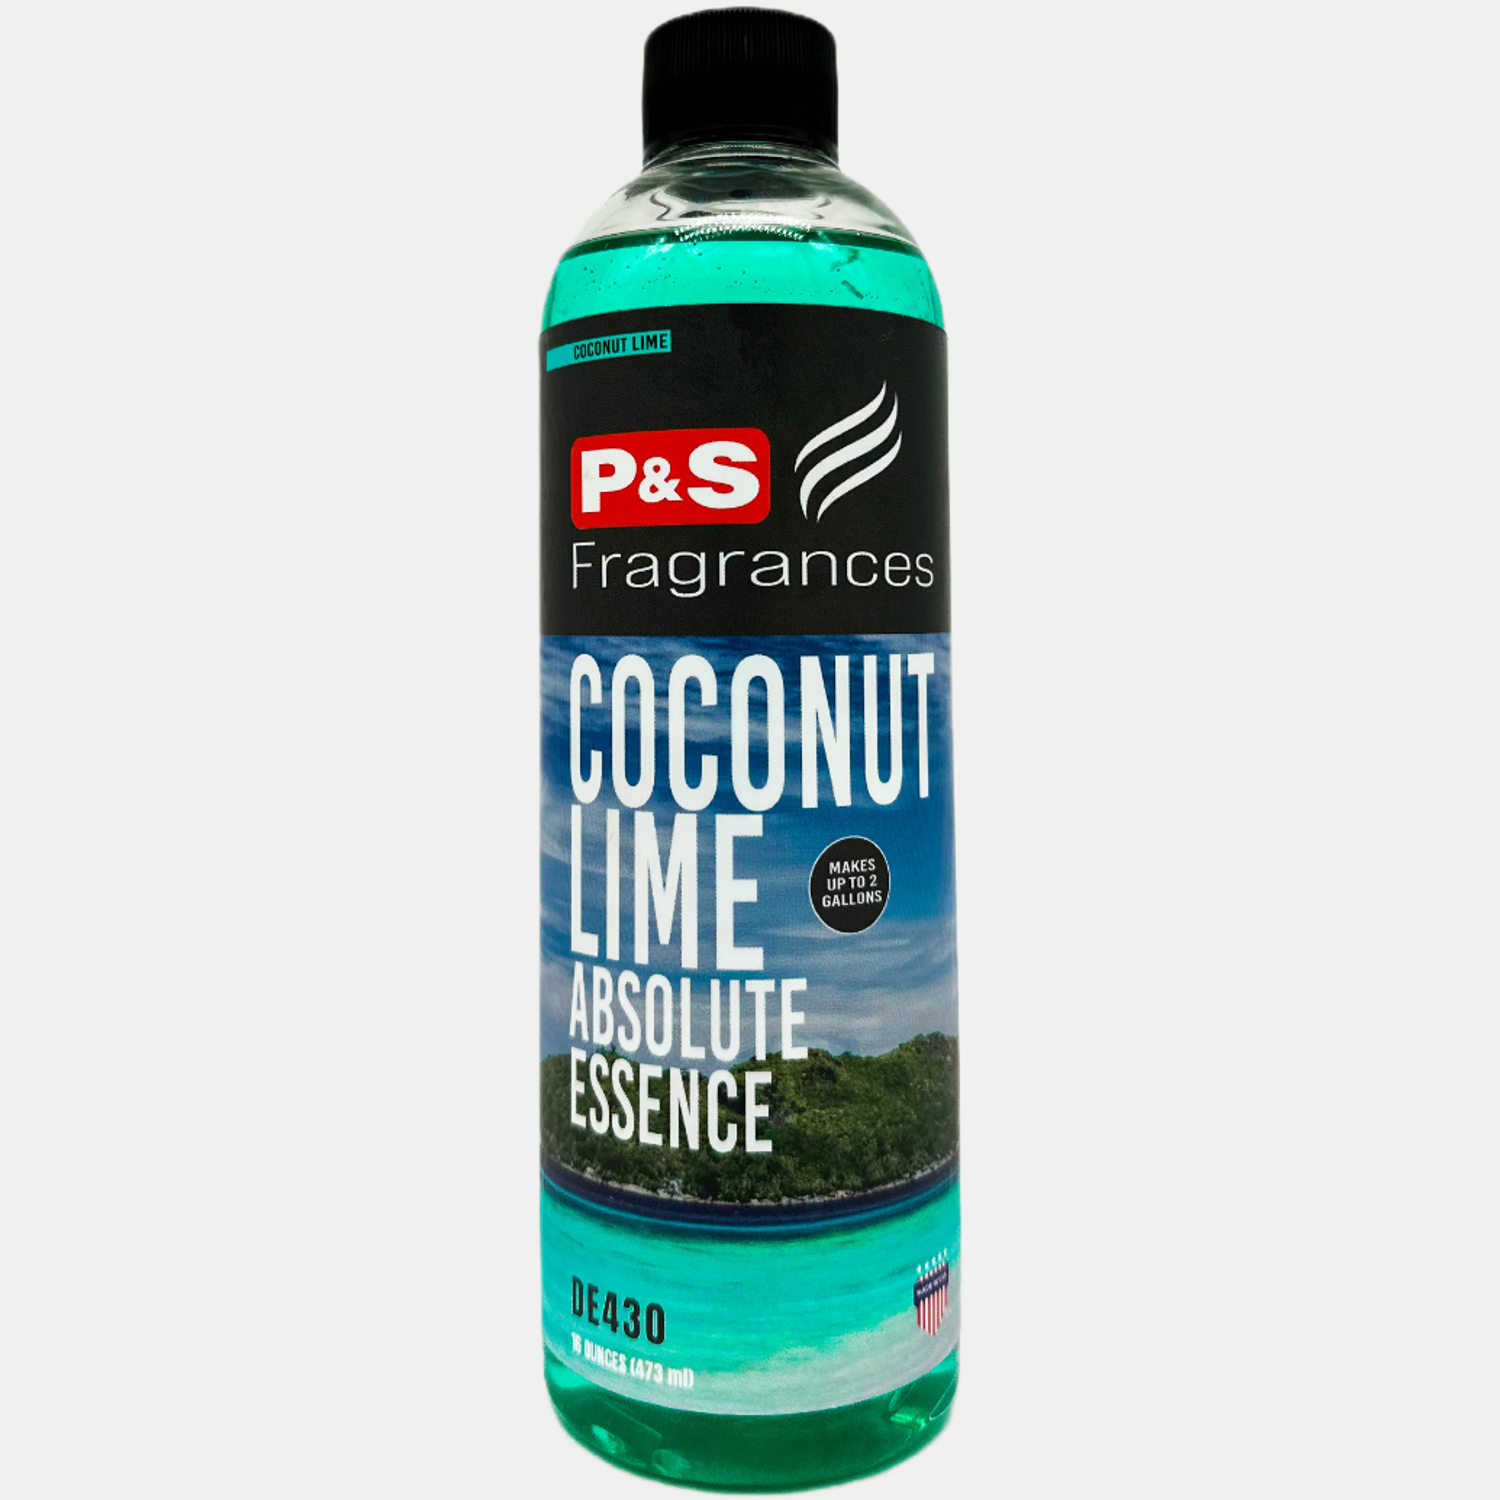 P&S Fragrances Coconut Lime Absolute Essence 16oz, Concentrated